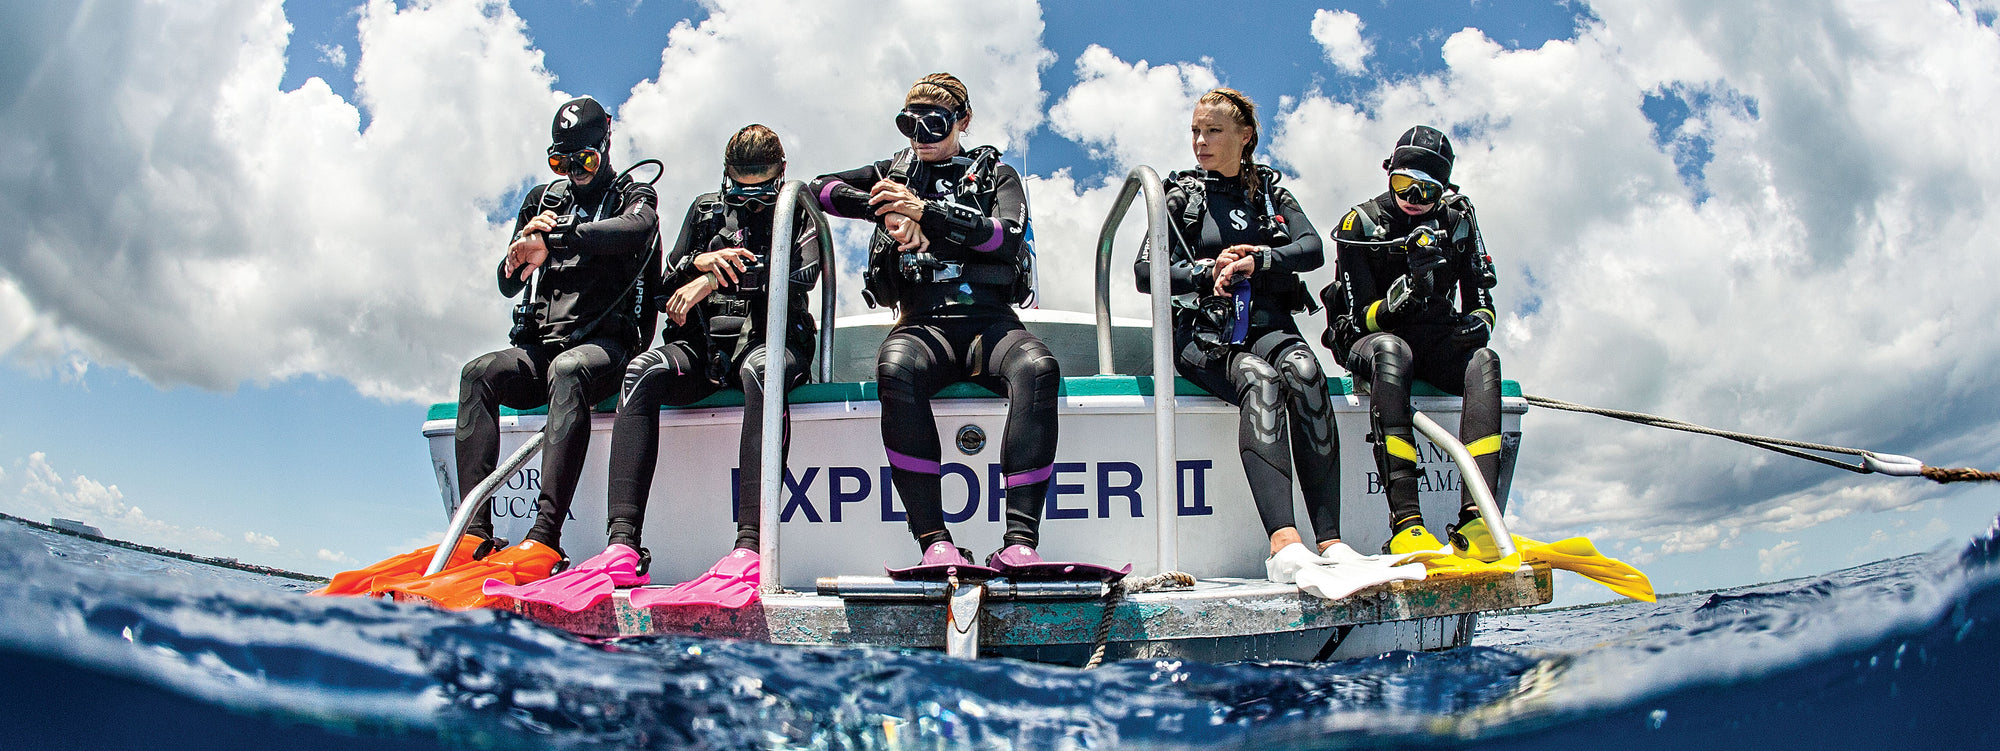 five scuba divers sitting on the back of a dive boat about to enter the water for their dive